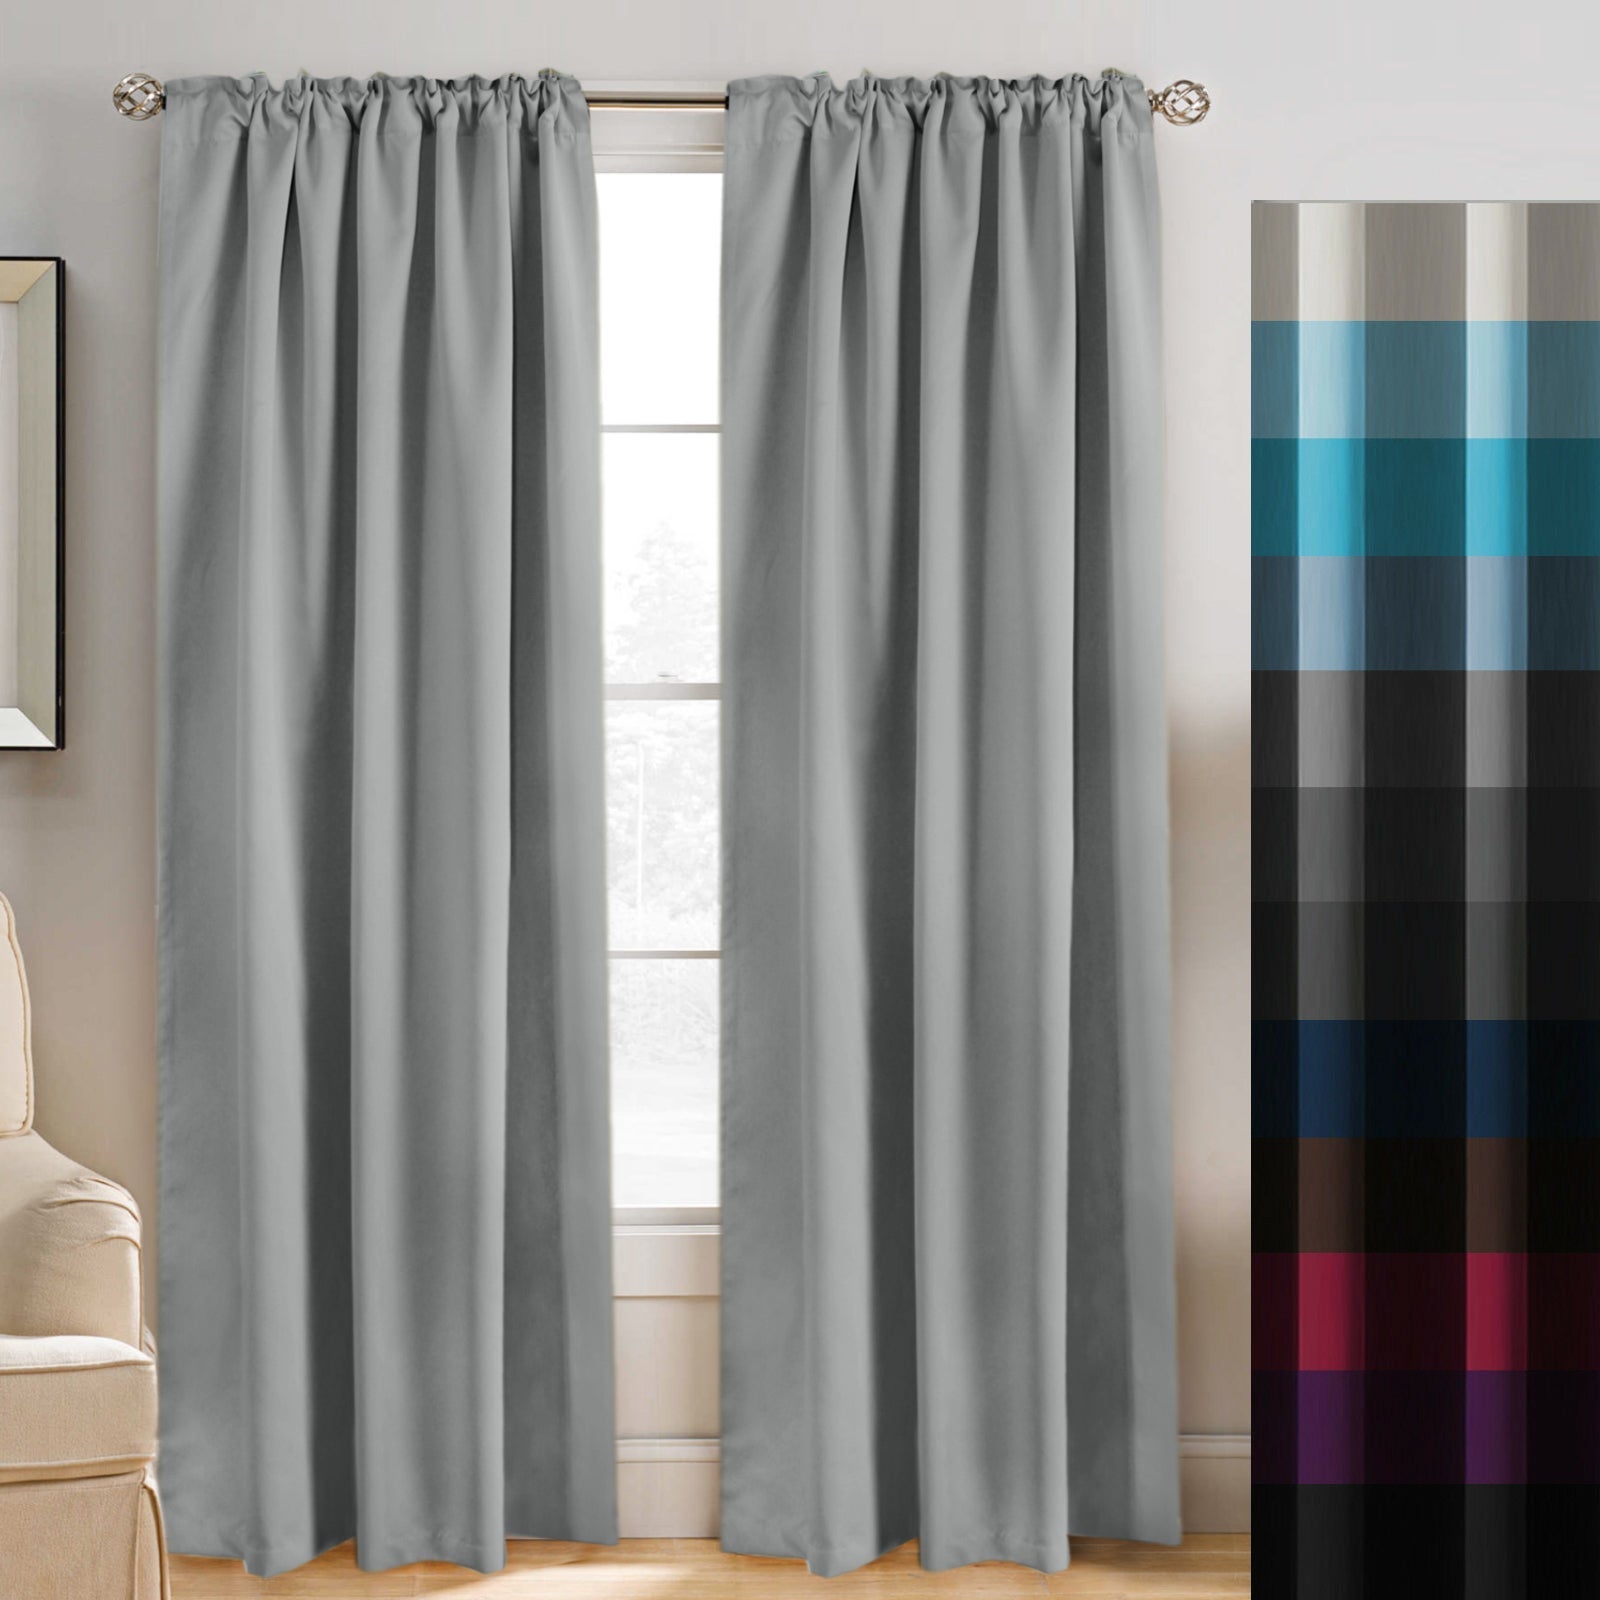 2x Blockout Curtains Blackout Curtain Draperies for Bedroom Living-2 Hanging way